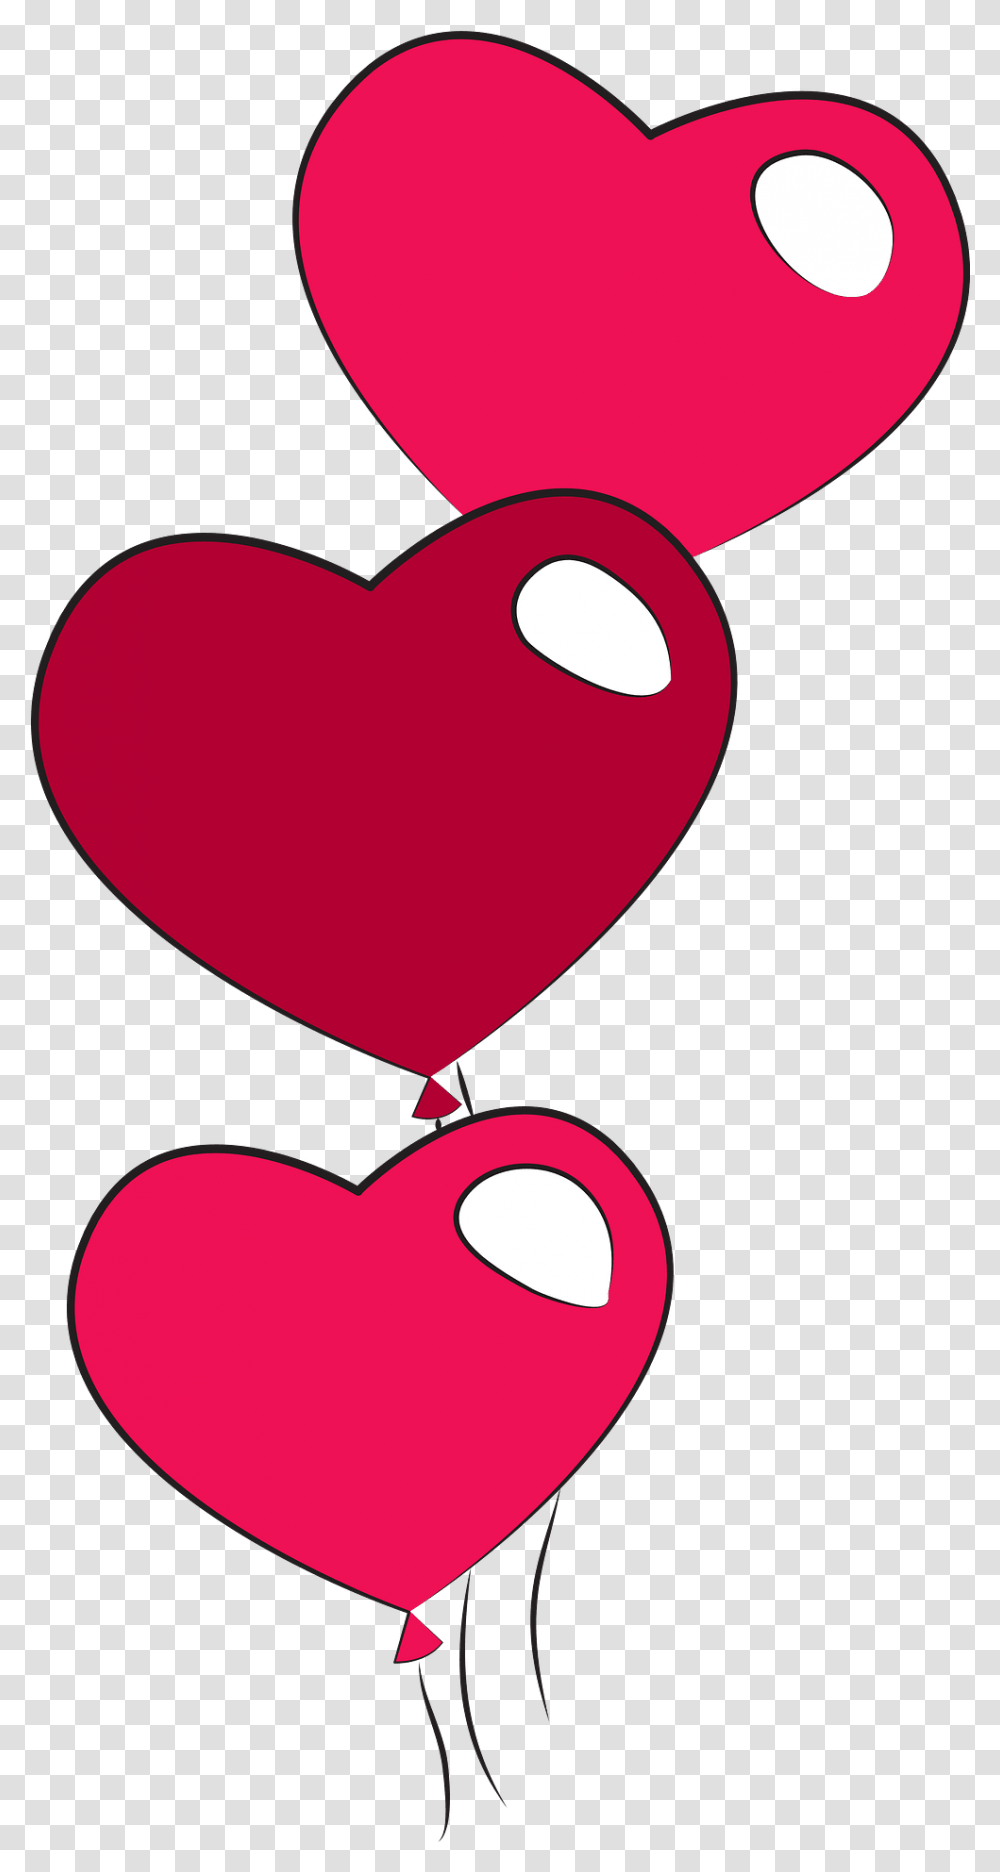 Heart Shaped Balloons Clipart Free Download Heart Shaped Balloon Clipart, Scissors, Blade, Weapon, Weaponry Transparent Png